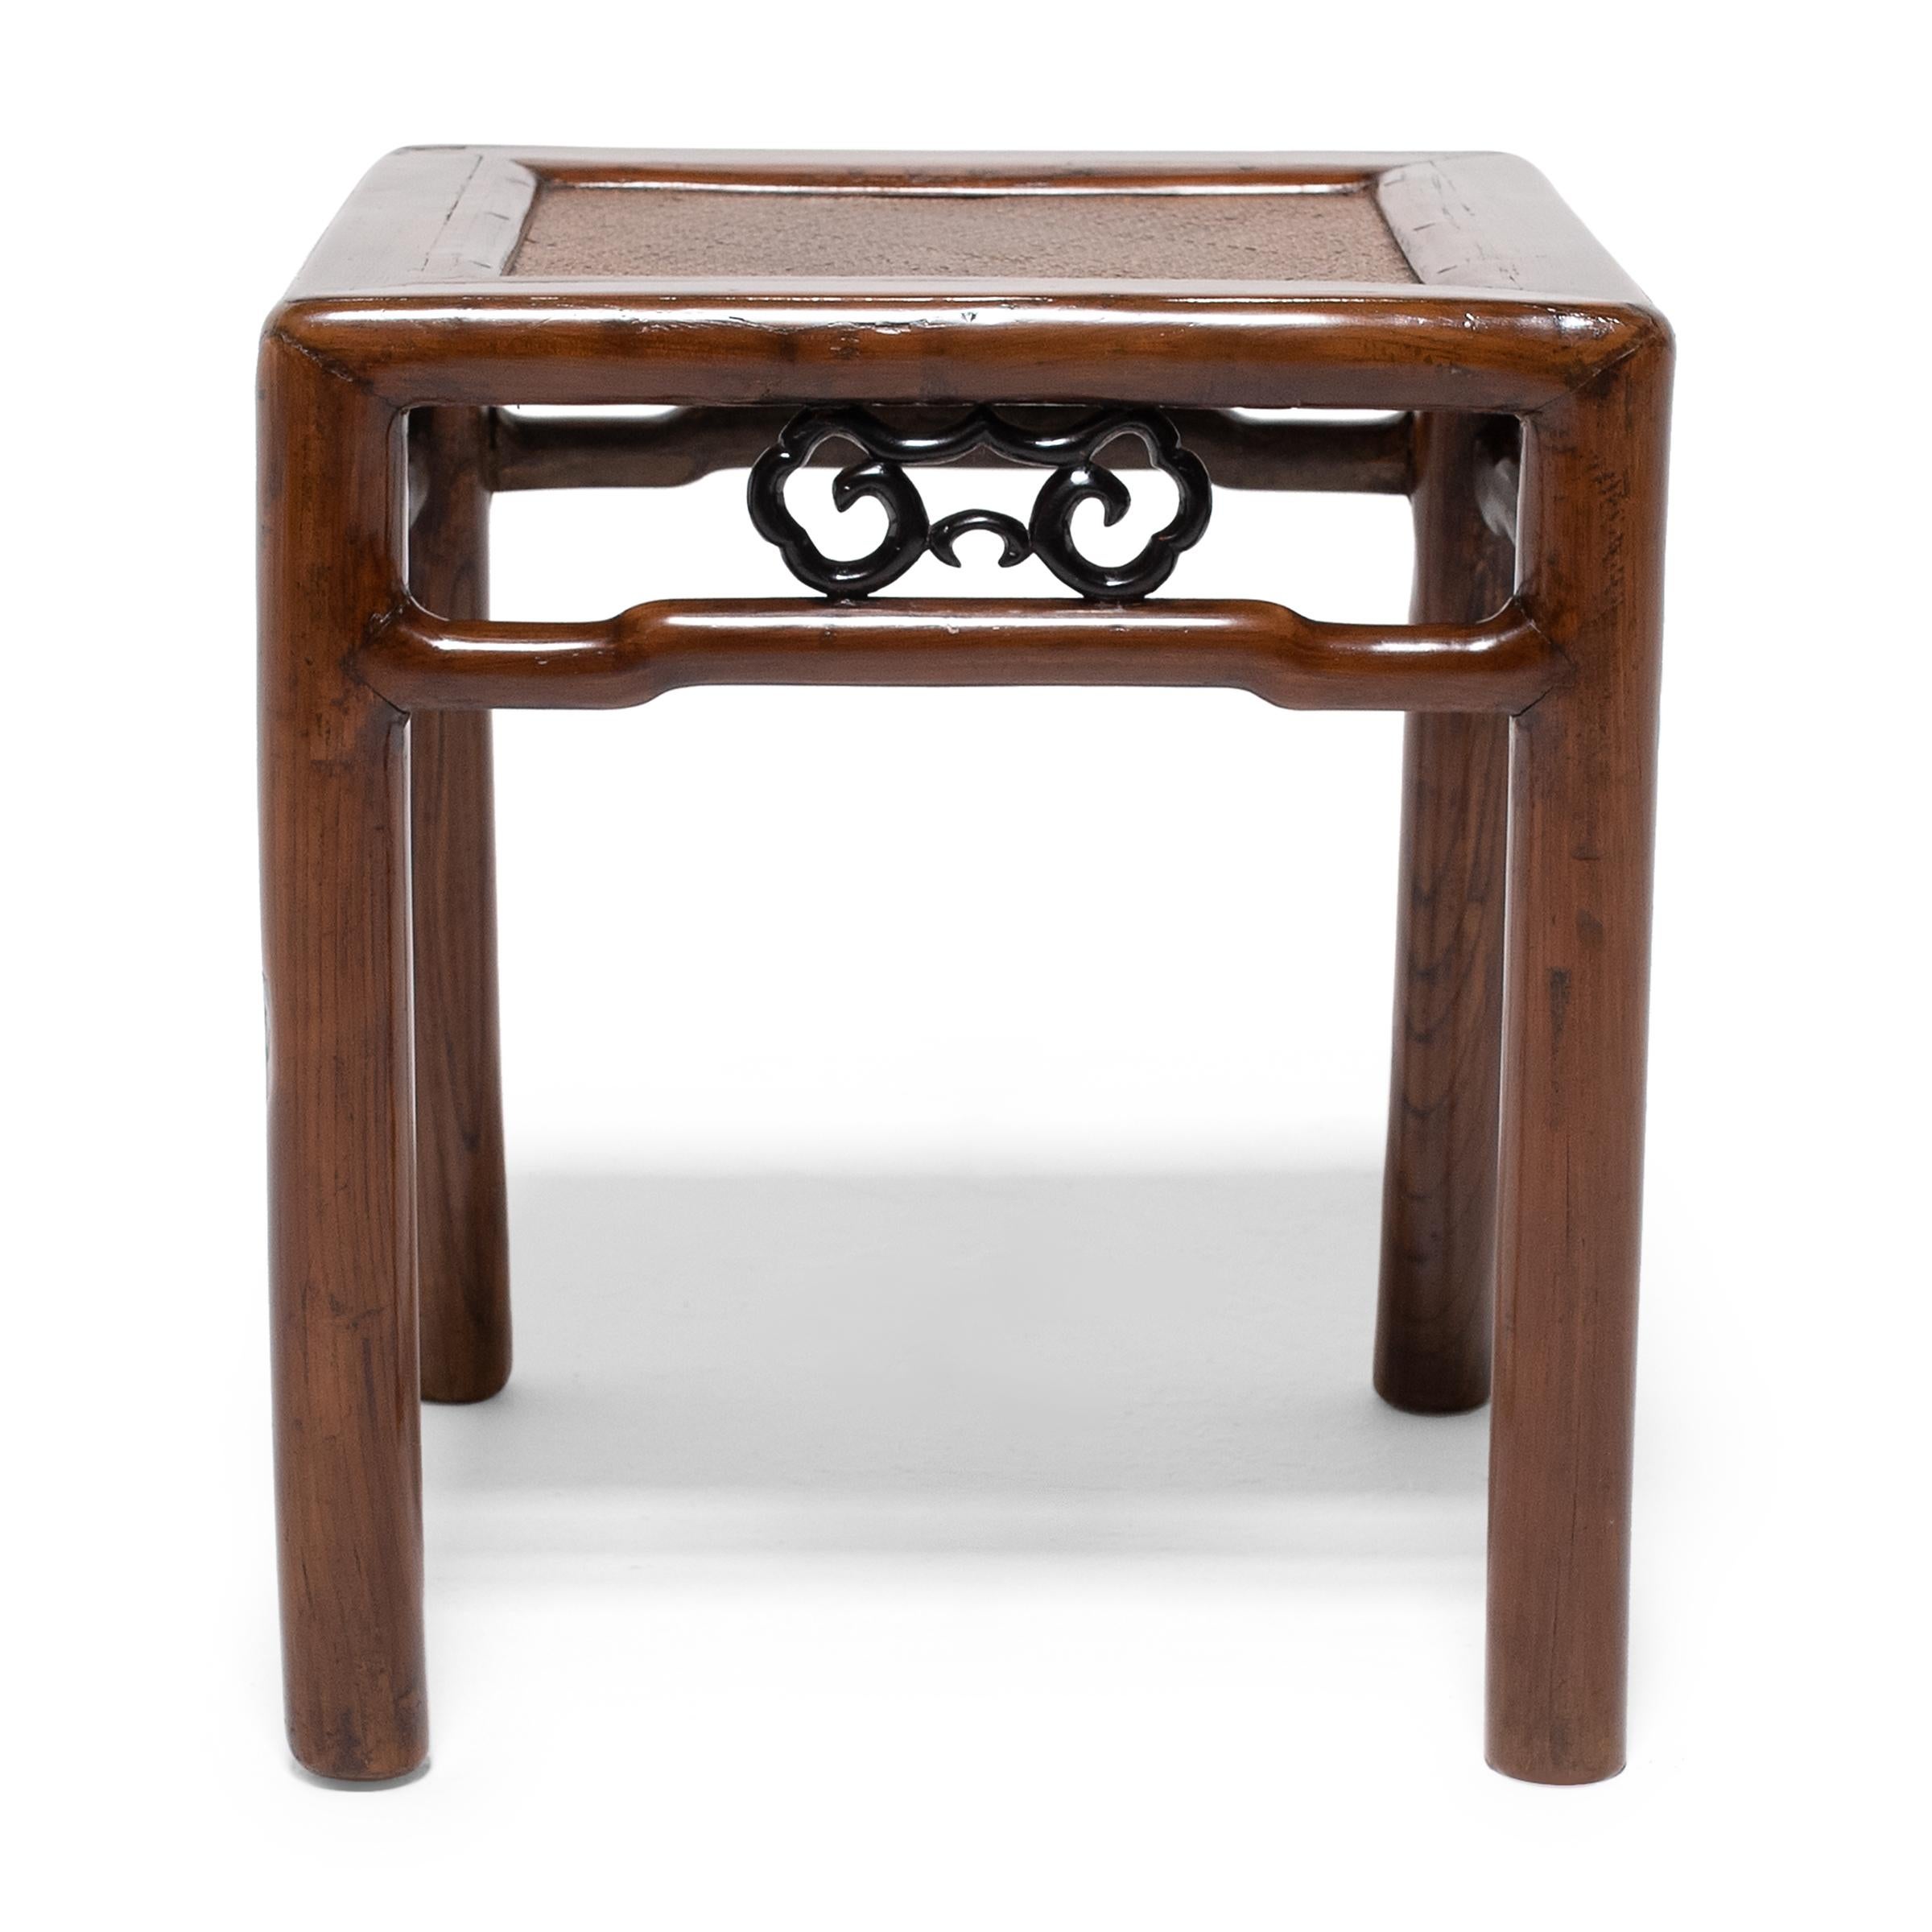 Lightweight and portable, stools were popular in Qing-dynasty homes for their simplicity and convenience. These elegant 19th-century square stools have beautifully worked frames featuring rounded edges, humpback stretchers, and ruyi-form fretwork